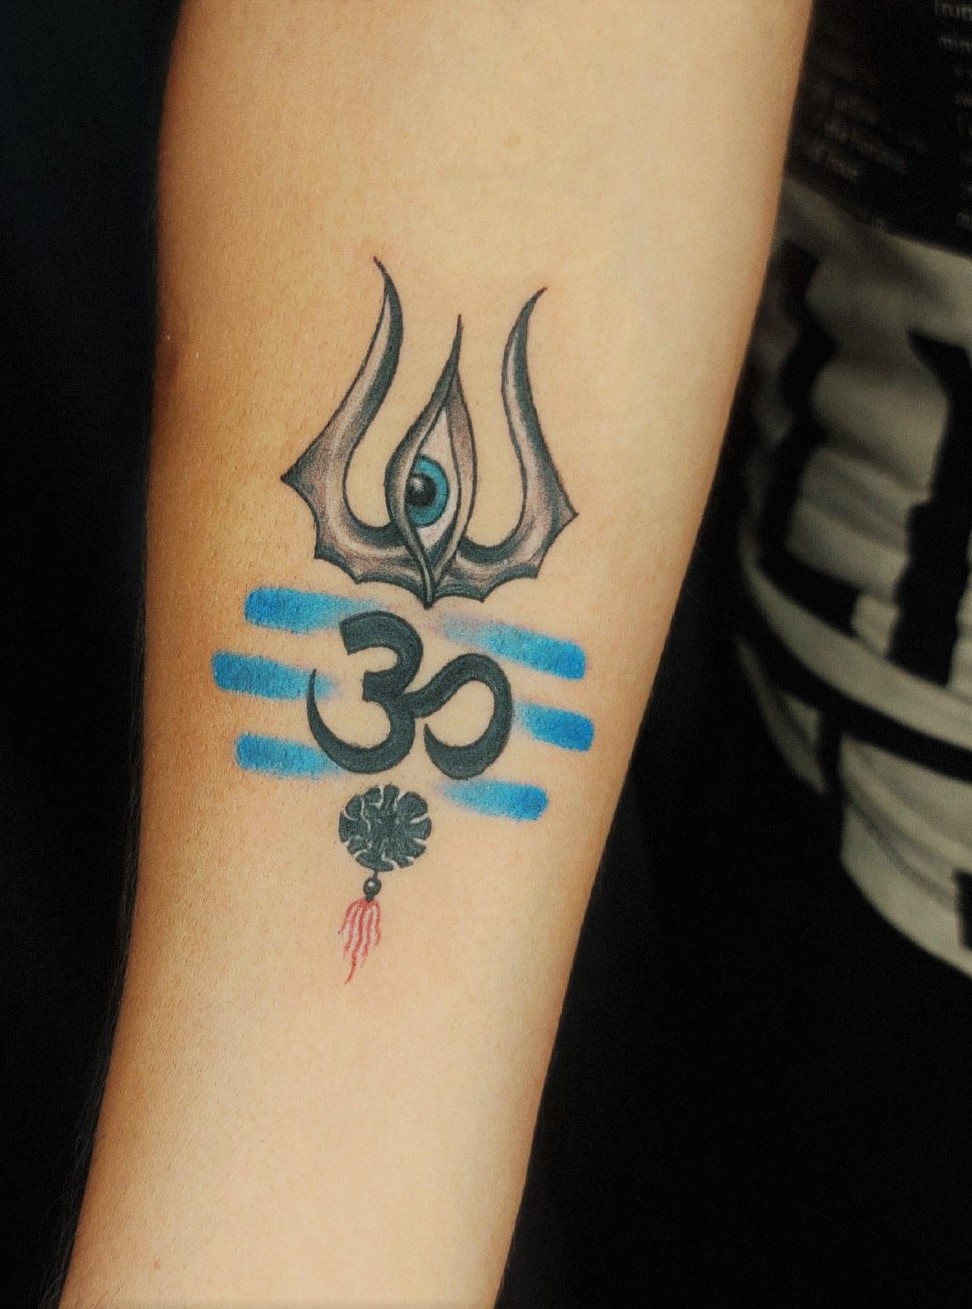 Trishul Shiva Tattoo with your partner from these Top 15 Designs